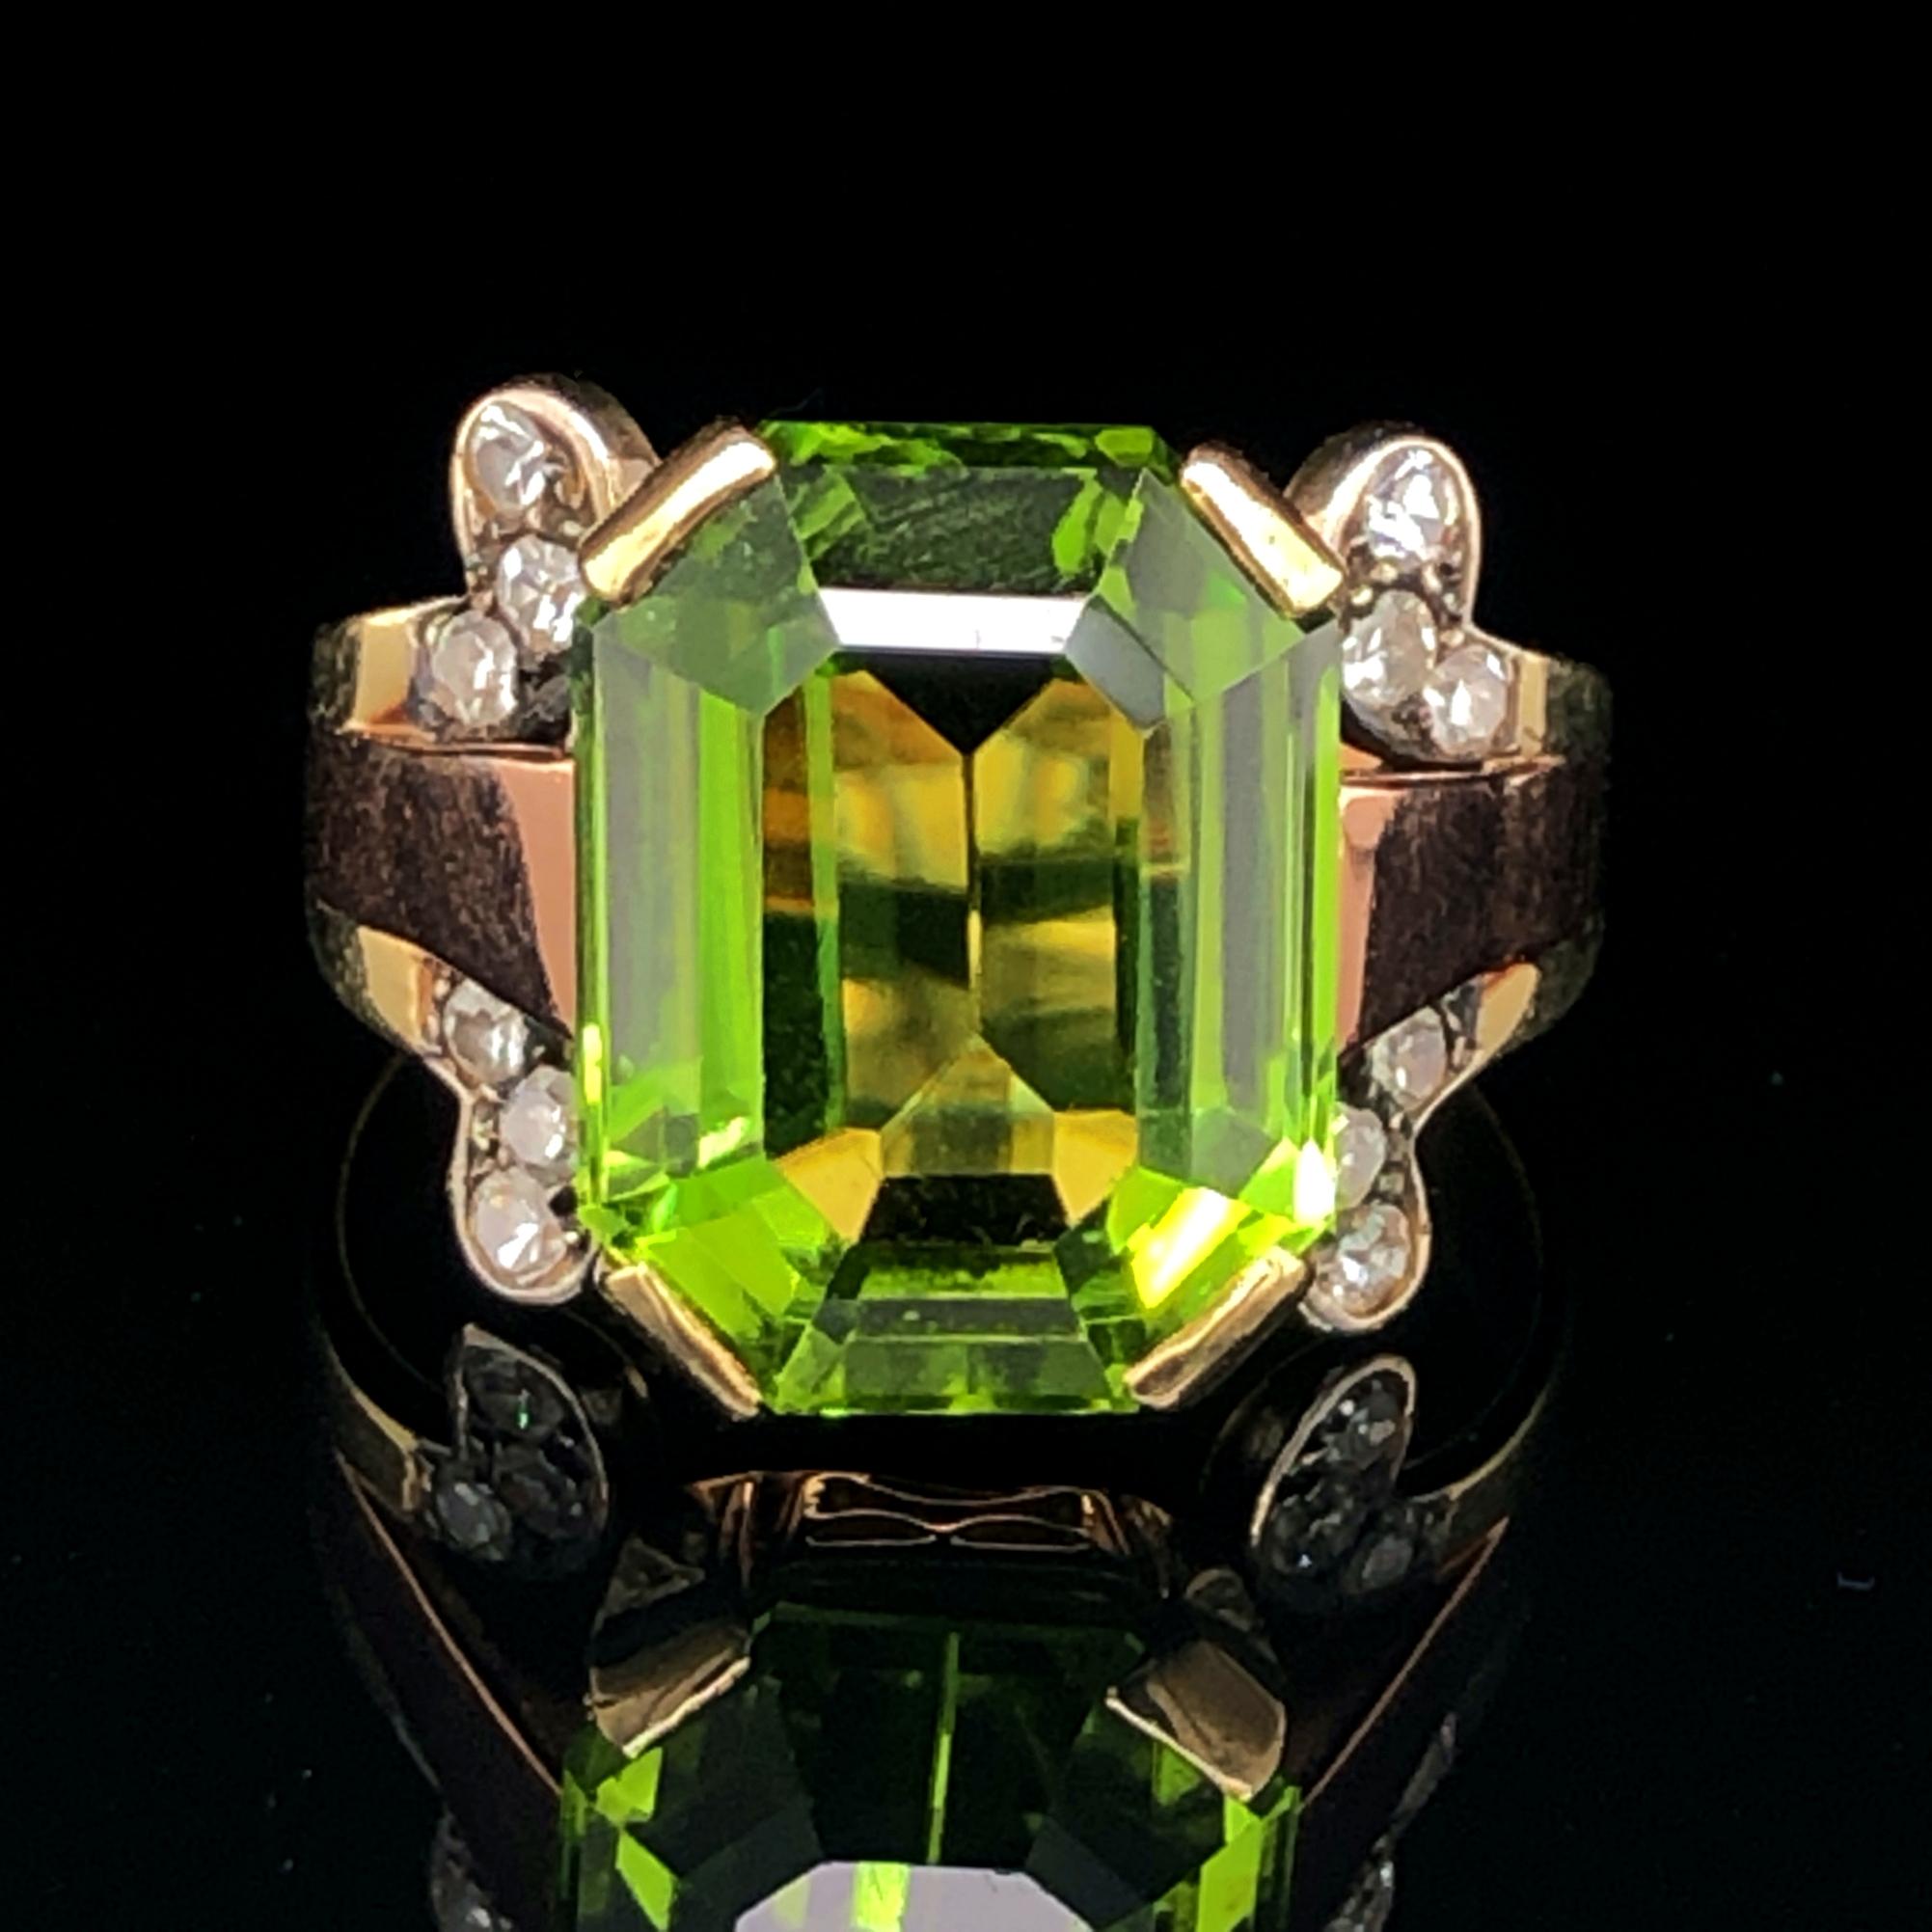 A peridot and diamond ring in 14k yellow and red gold, ca. 1950s. The emerald cut peridot weighs 11.12 carats and is a very clean gemstone with a vivid colour and crystal. The peridot is set to stand out and is neighboured by 12 single cut diamonds